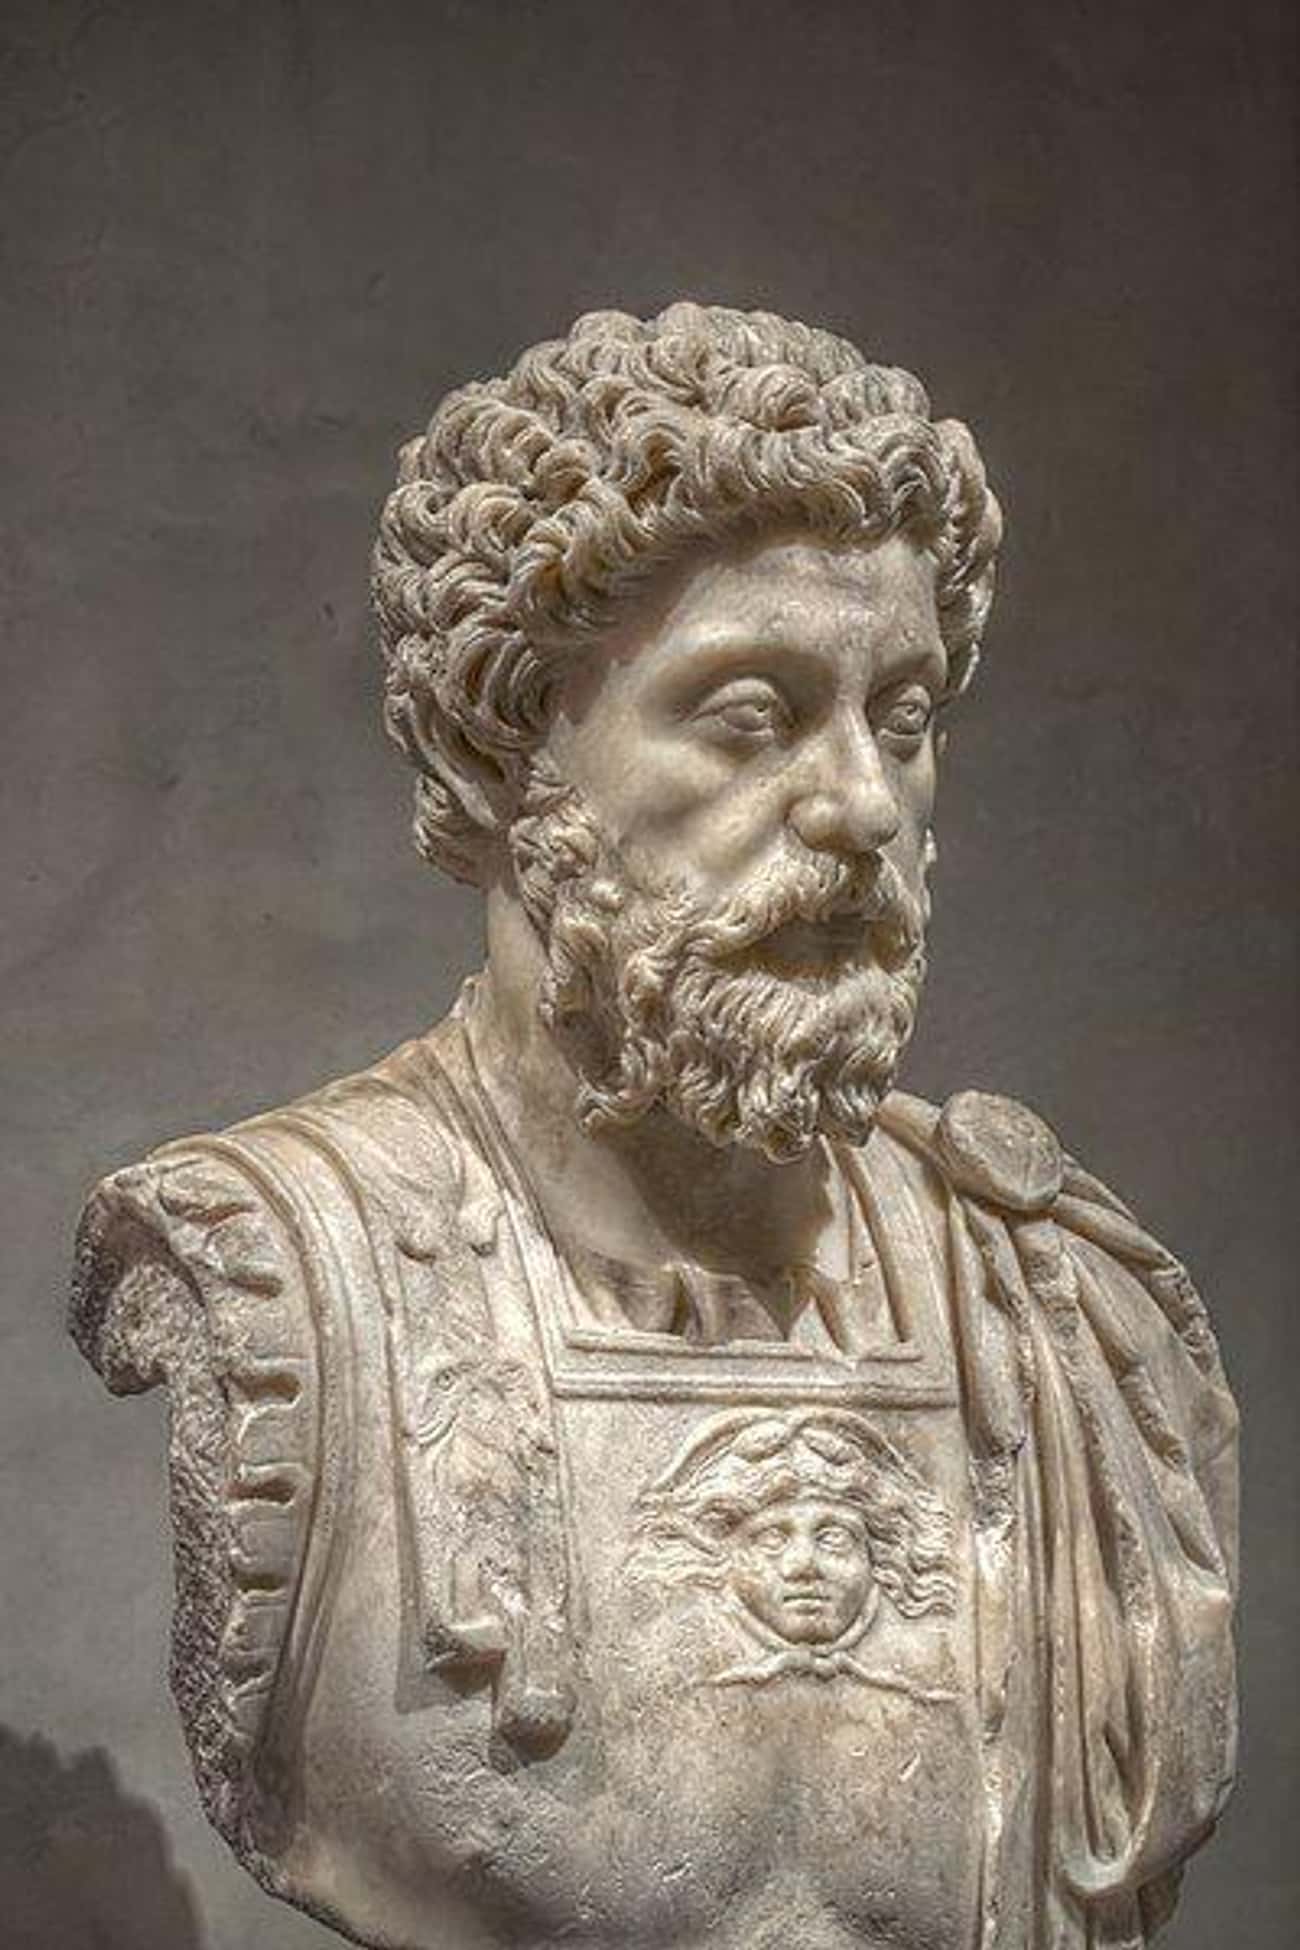 The Nerva-Antonine Dynasty Comprised The Five Good Emperors of Rome